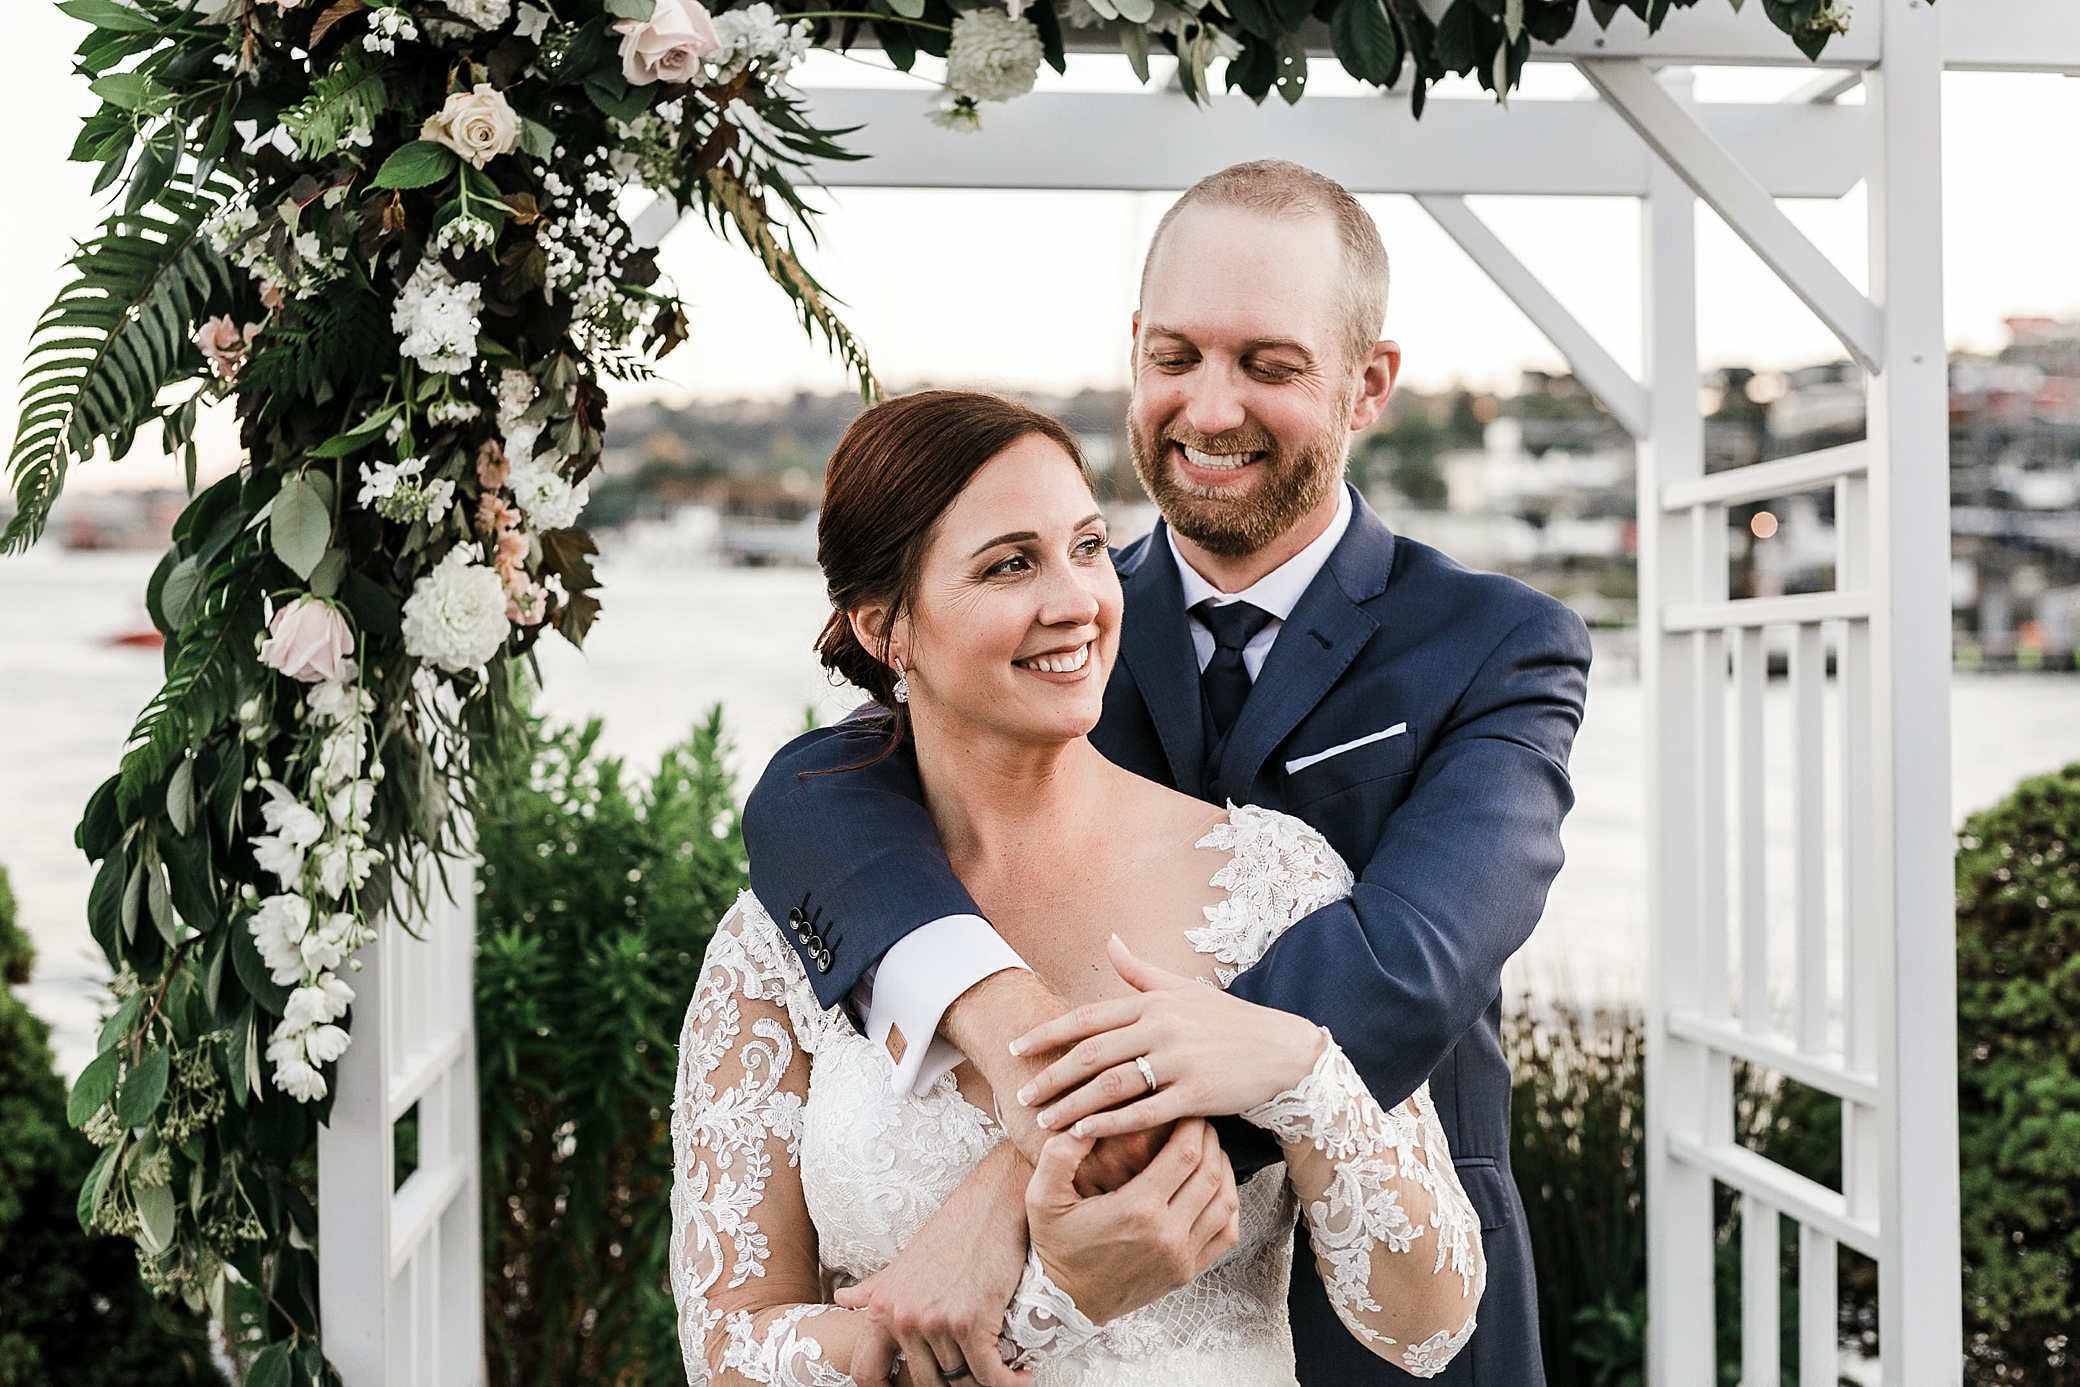 Bride and groom portraits at Seattle waterfront wedding venue | Megan Montalvo Photography 